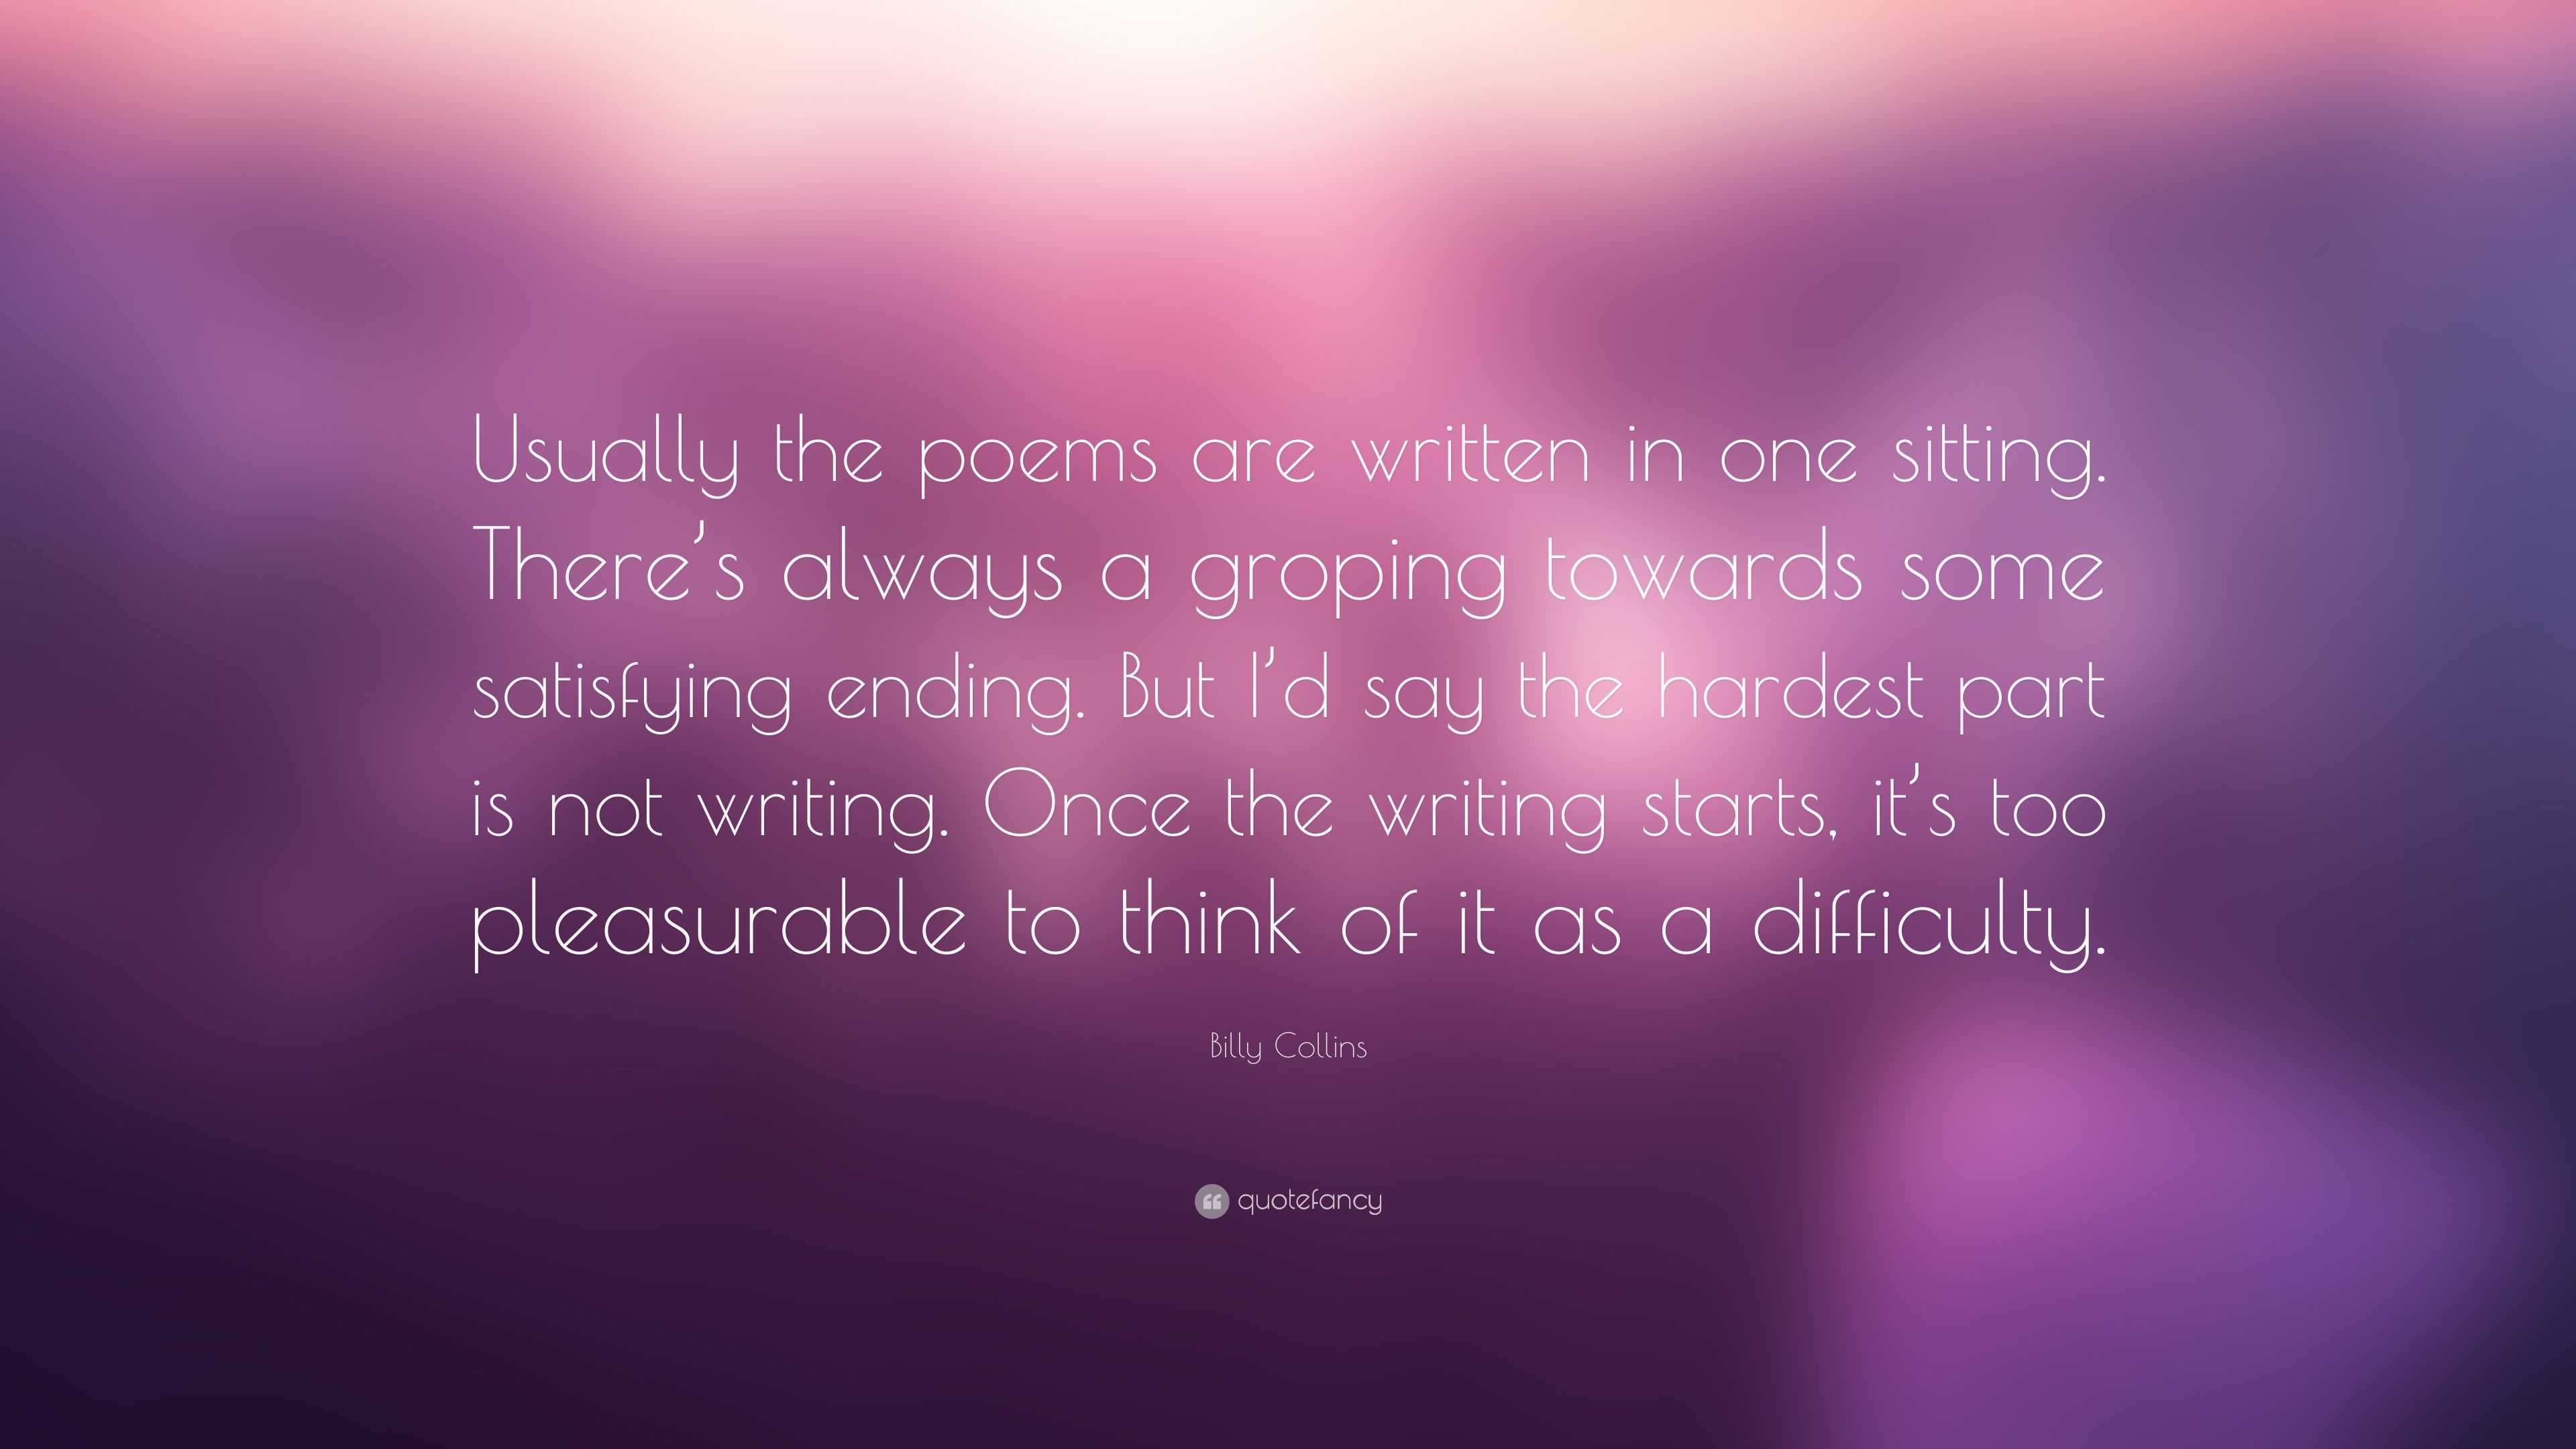 Billy Collins Quote: “Usually the poems are written in one sitting ...